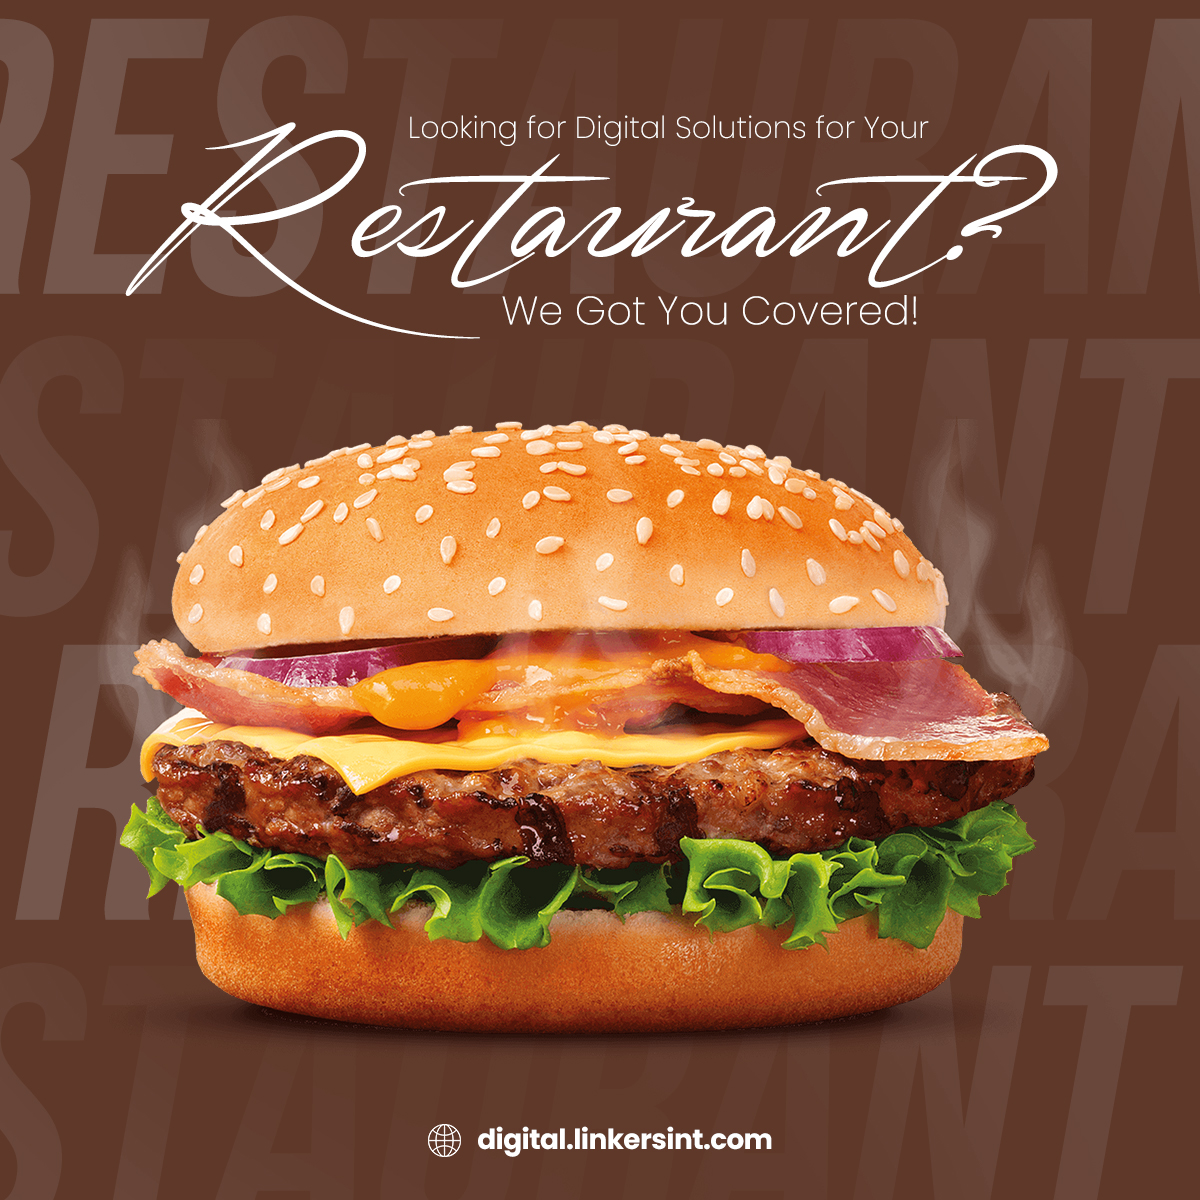 Craving digital success for your food business? Look no further! Discover our comprehensive digital strategies tailored for your business. From online ordering to social media solutions, we've got you covered. Elevate your restaurant's digital presence and satisfy your customers